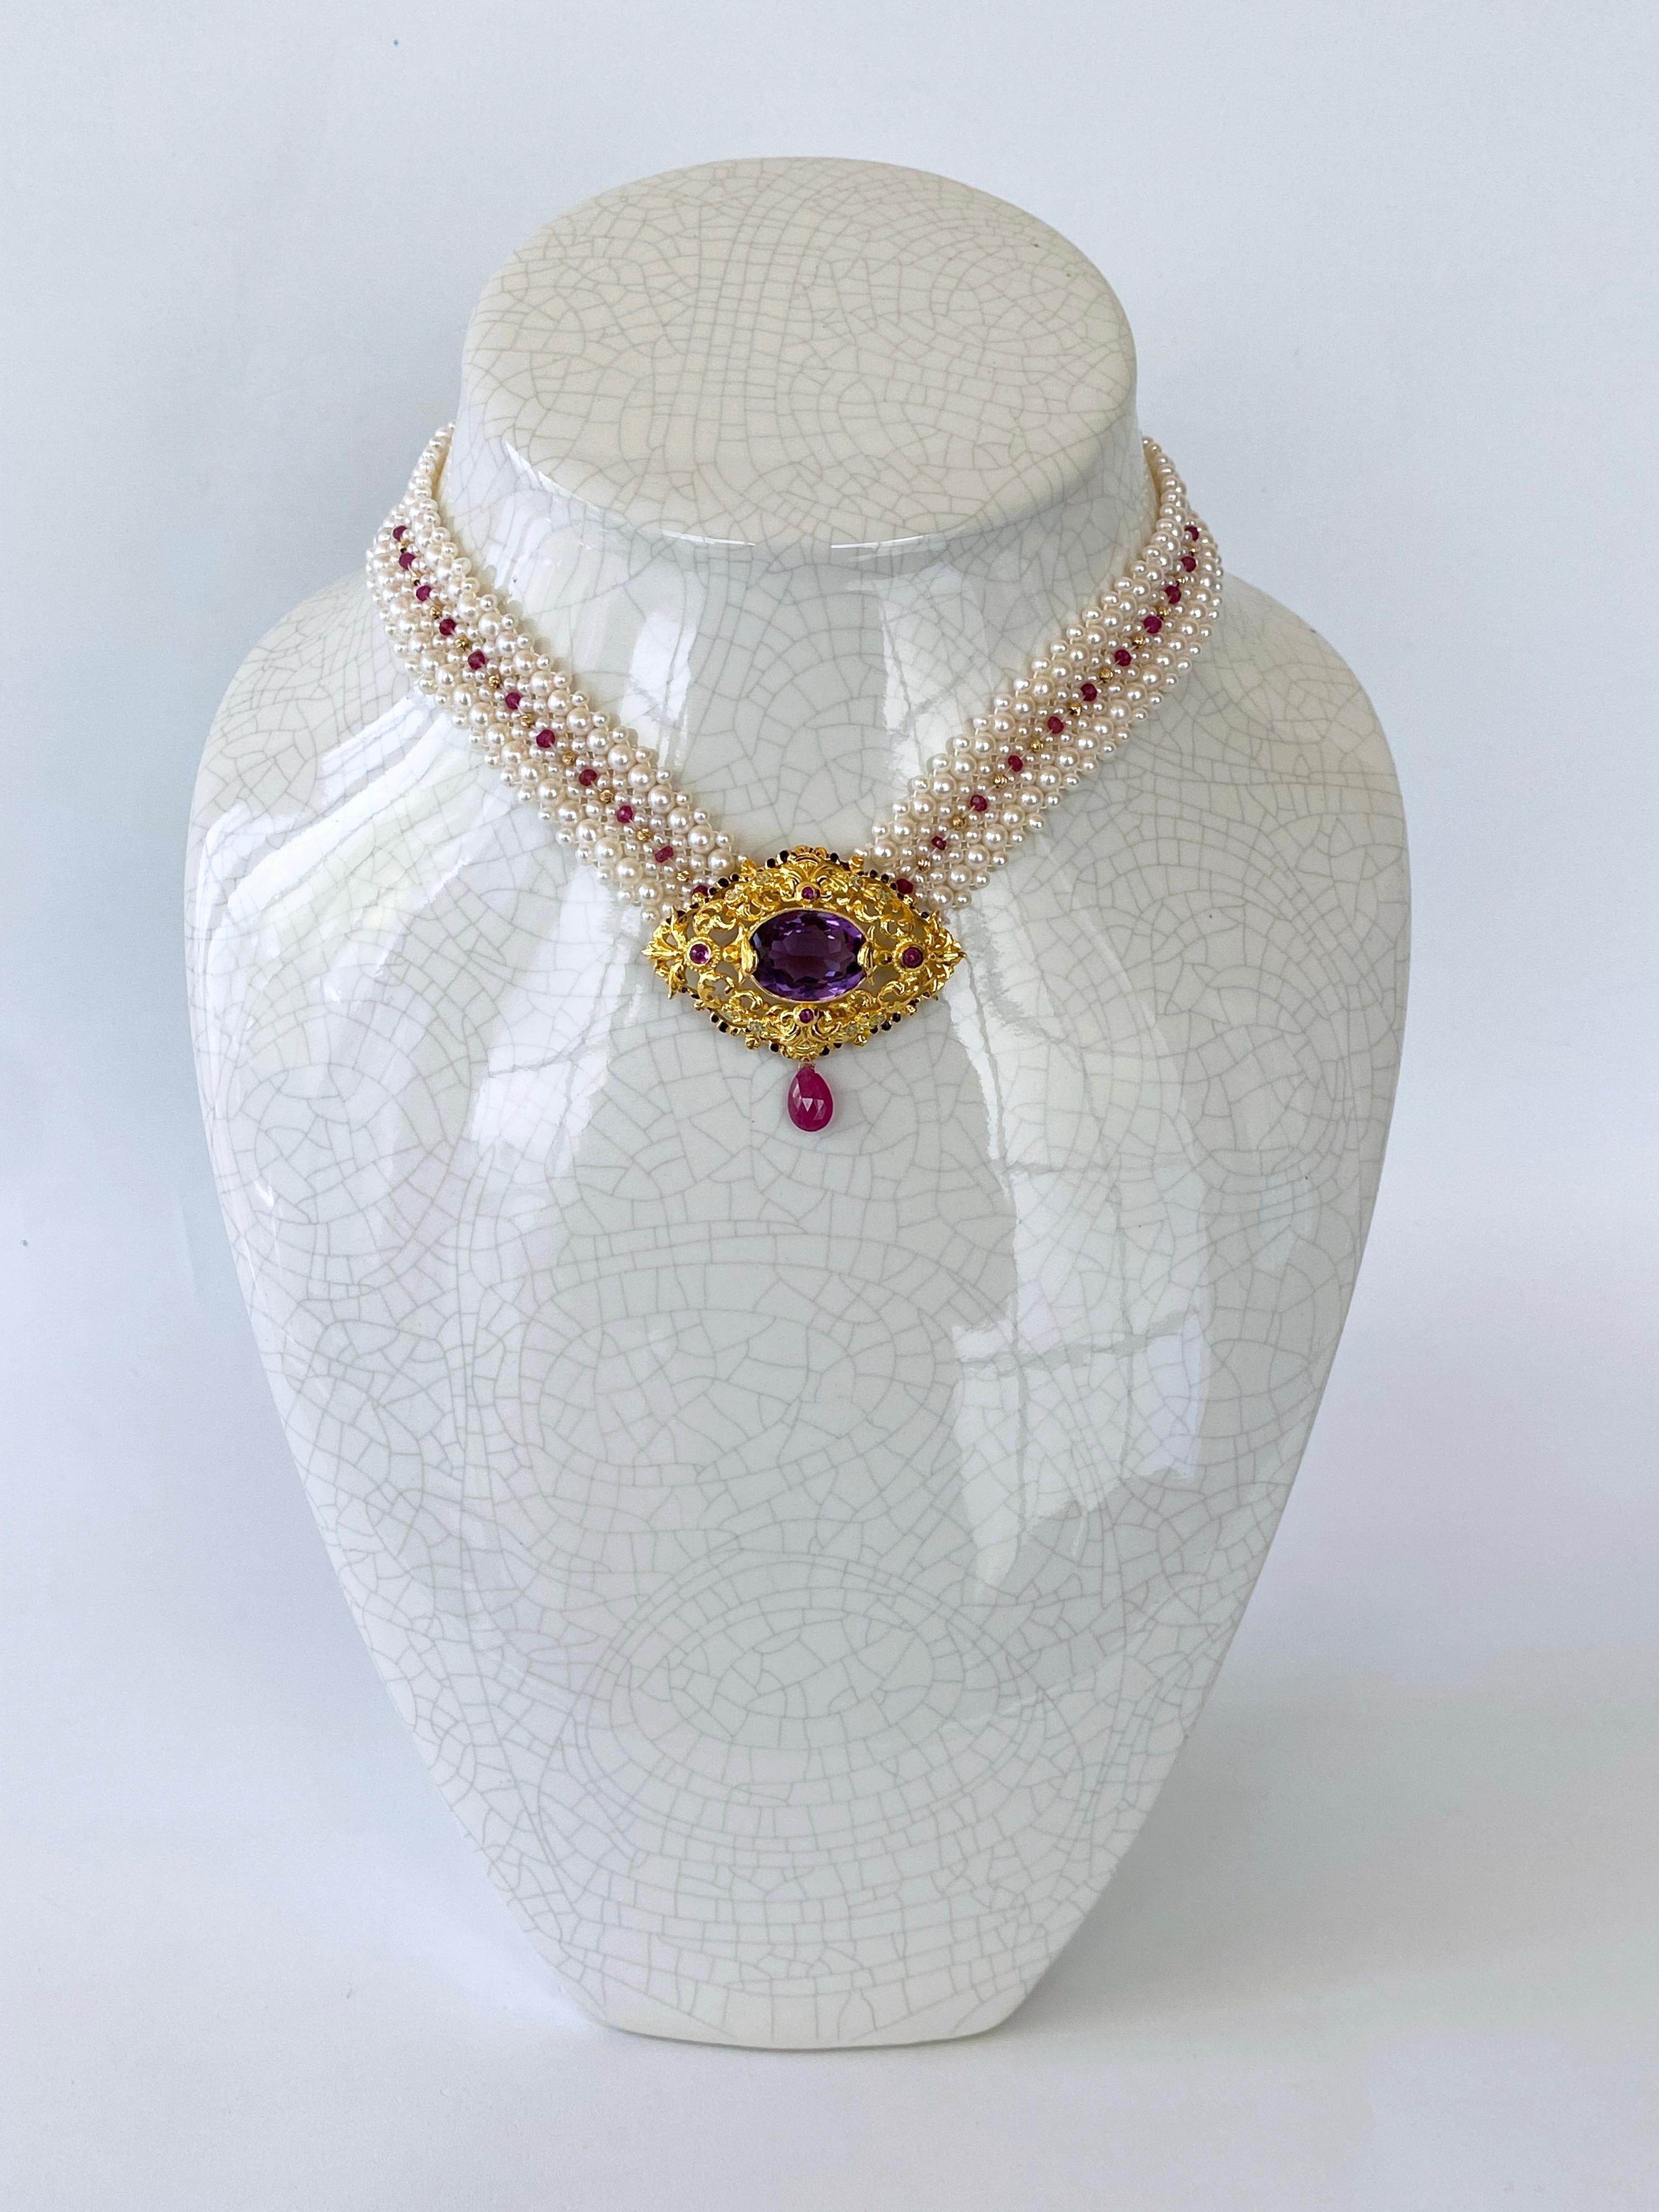 Women's Marina J. Woven Pearl, Ruby & Gold Necklace with Vintage Gold & Amethyst Brooch